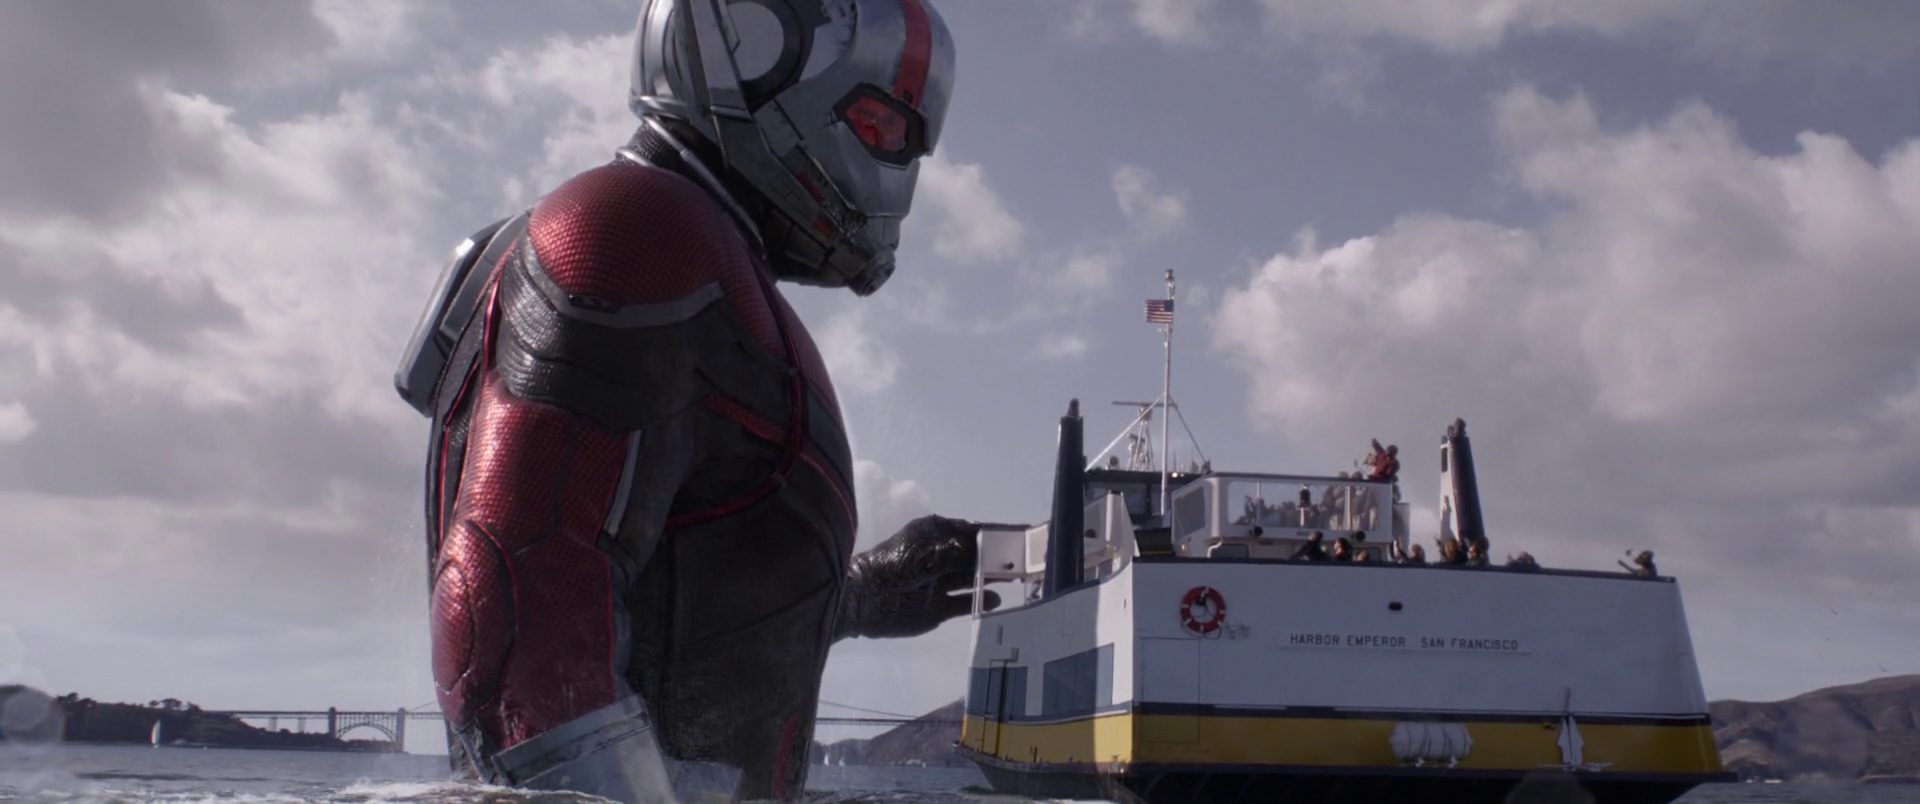 Scott Lang (Paul Rudd) emerges from the San Francisco Bay as Giant-Man in Ant-Man and the Wasp (2018), Marvel Entertainment